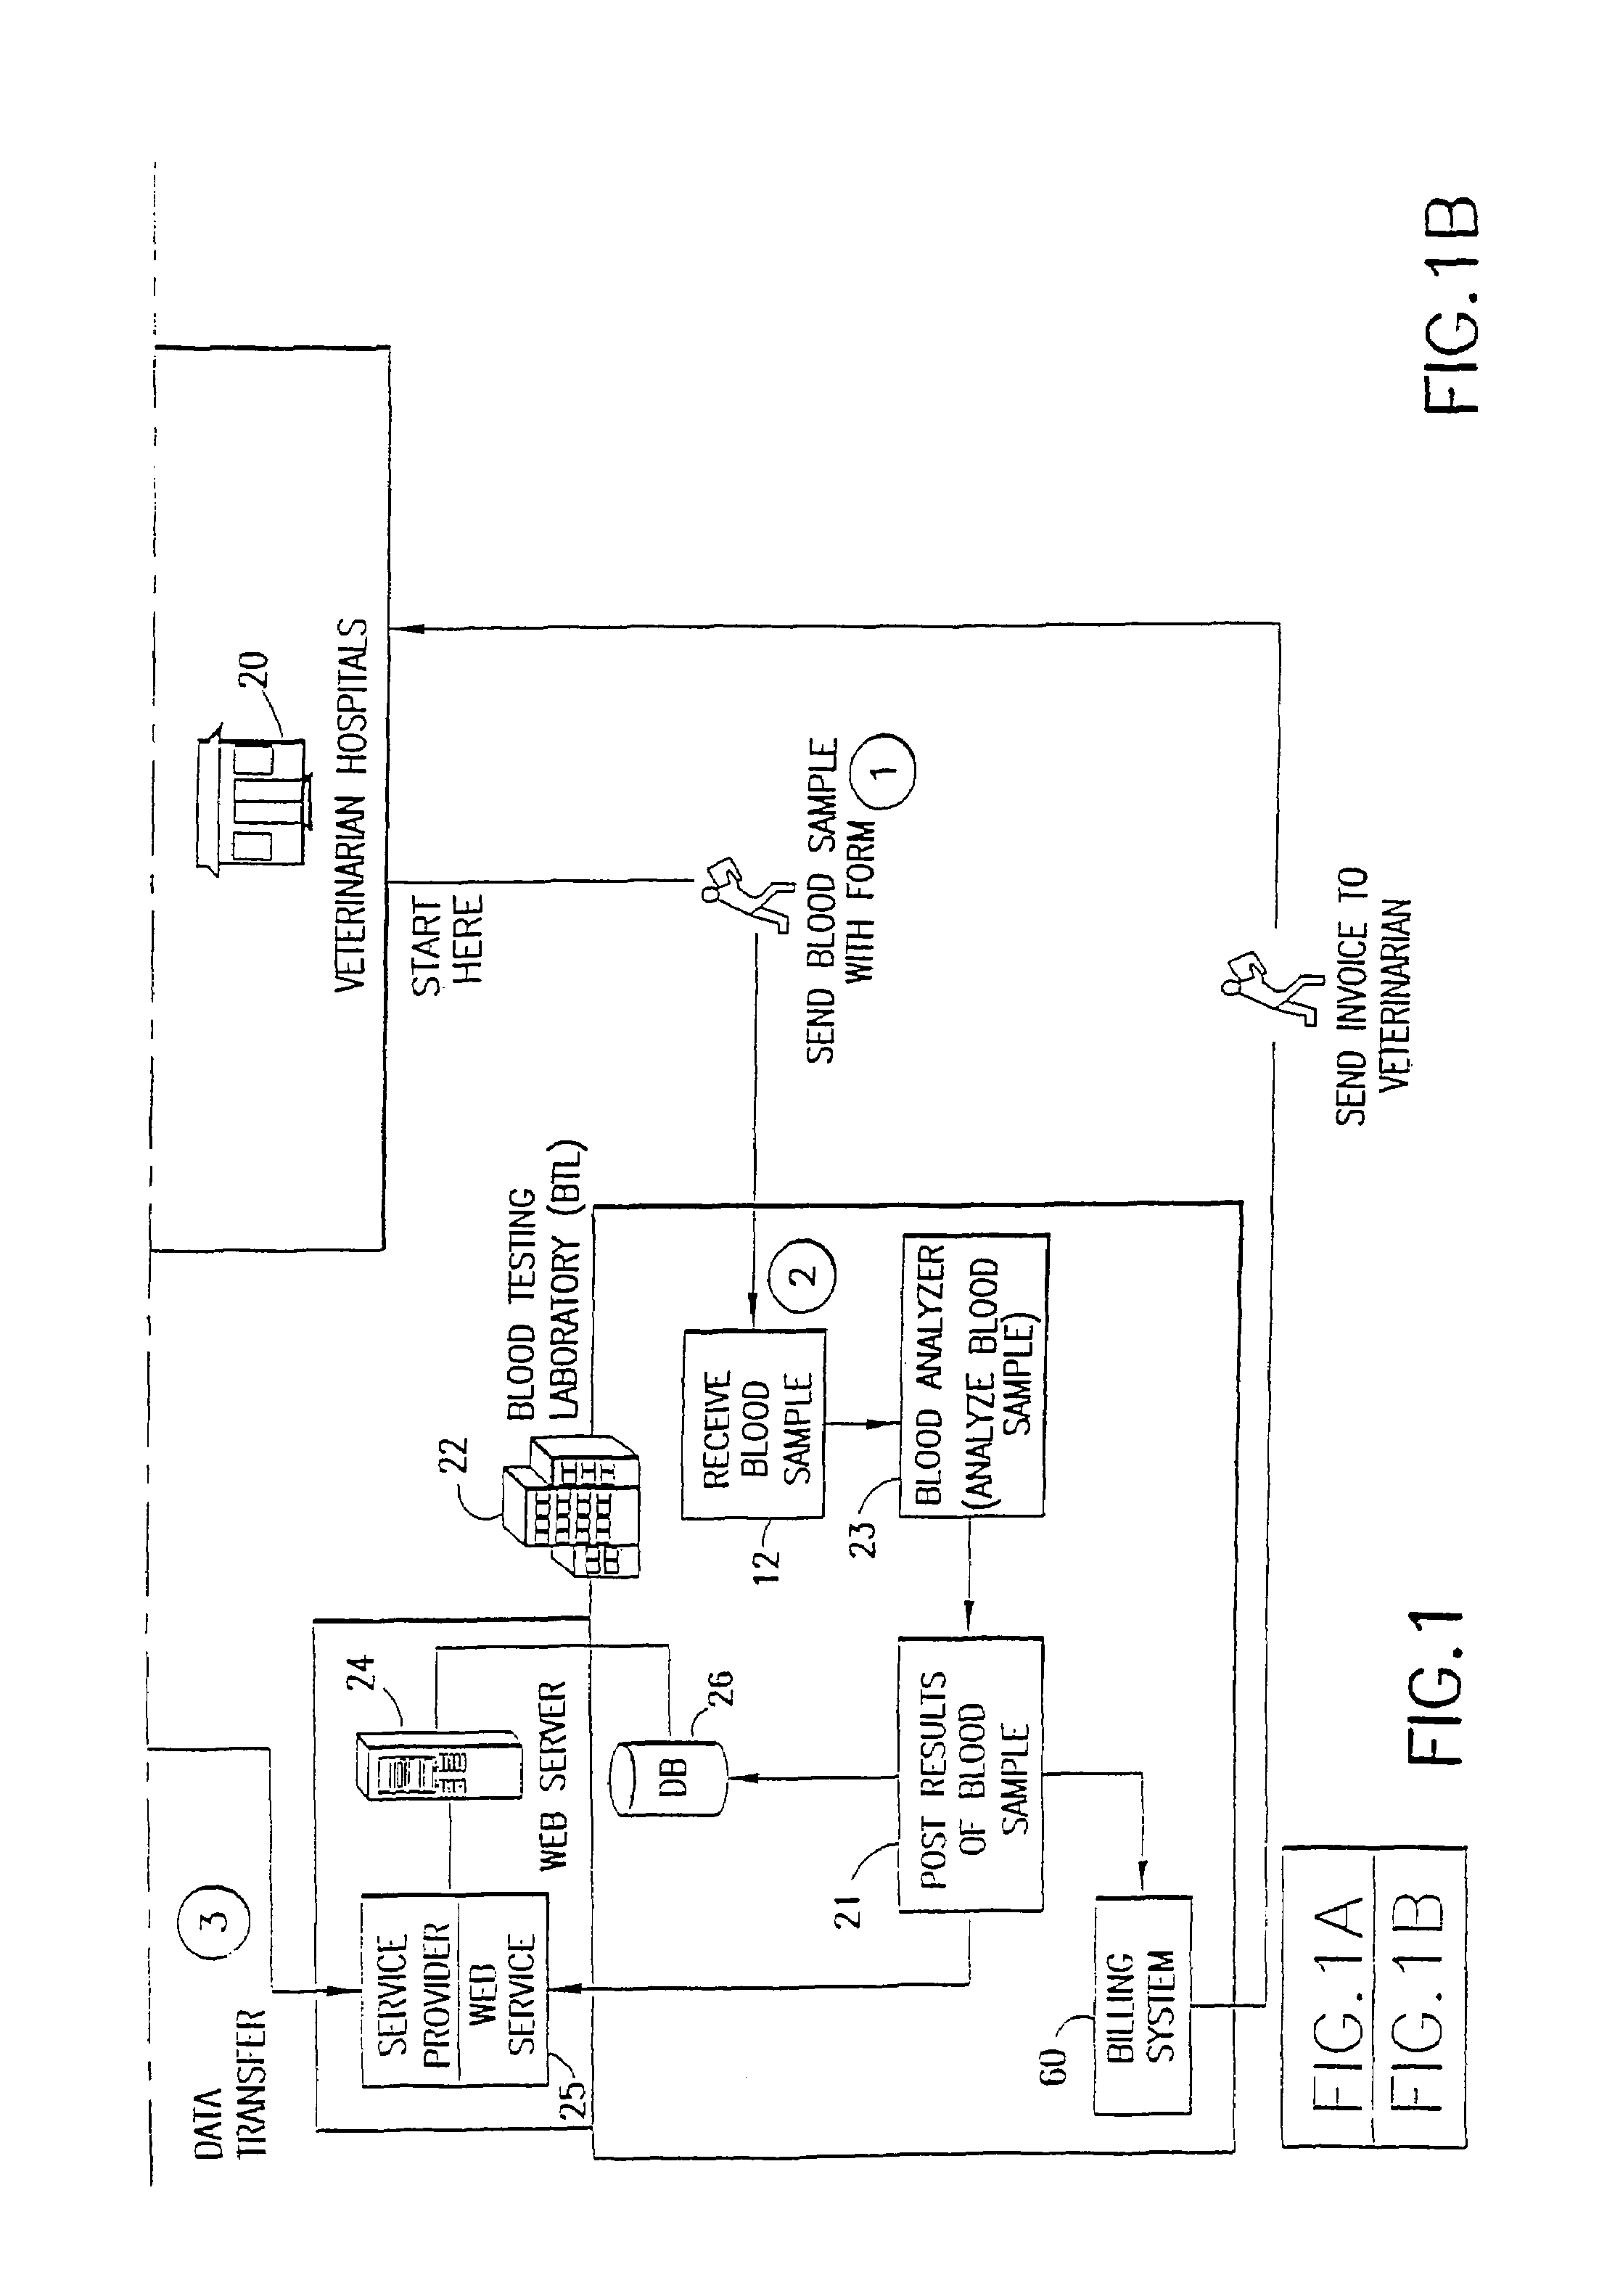 Methods and systems for providing a nutraceutical program specific to an individual animal